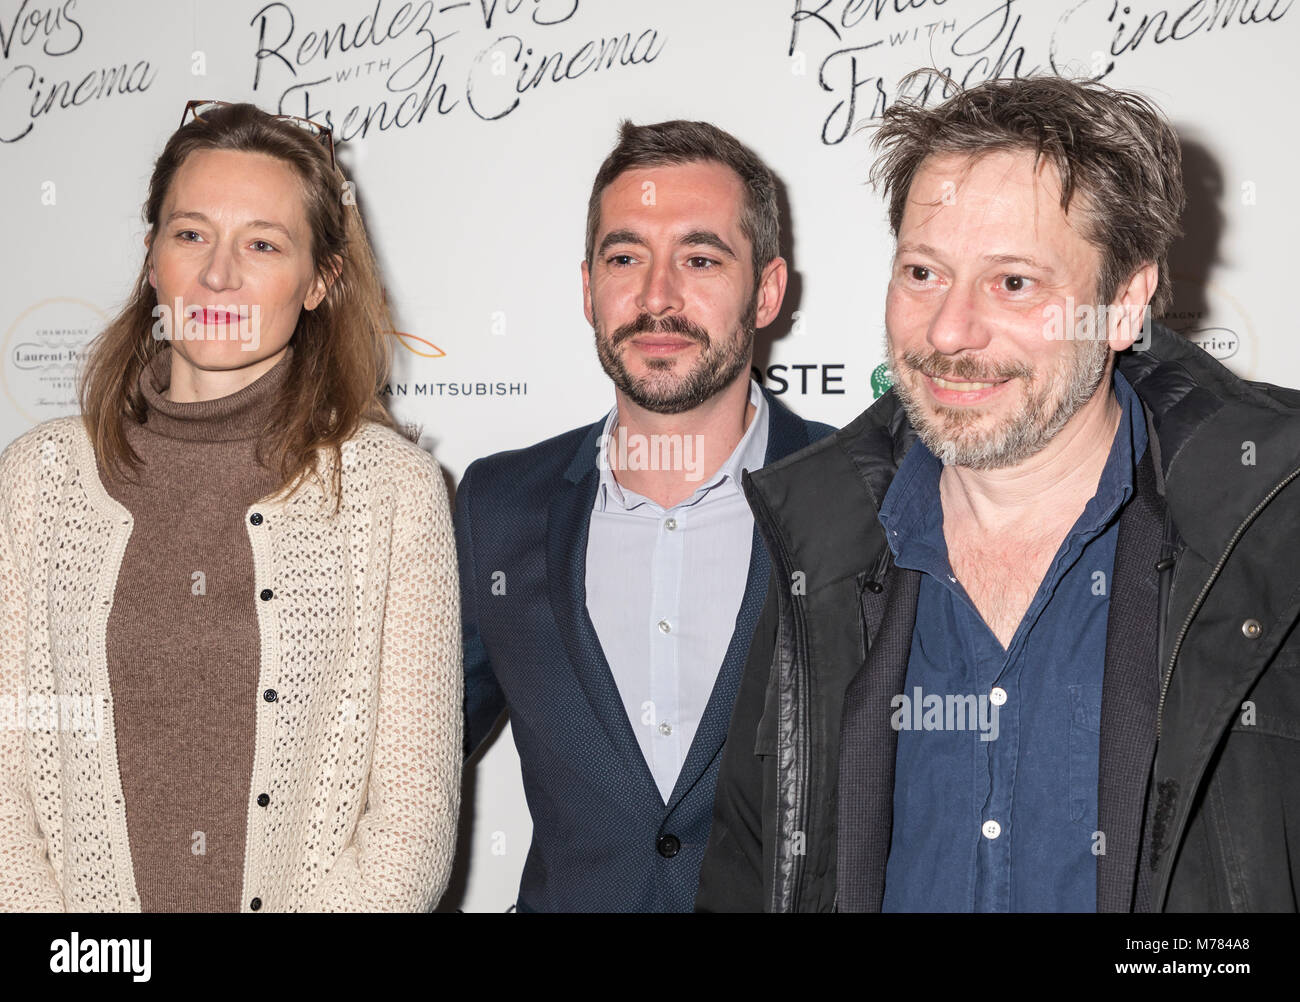 New York, NY, USA - March 8, 2018: (L-R) Marine Francen, Xavier Legrand, Mathieu Amalric attend Renez-Vous with French Cinema Opening Night - Barbara US Premiere at FSLC’s Walter Reade Theater, Manhattan Stock Photo